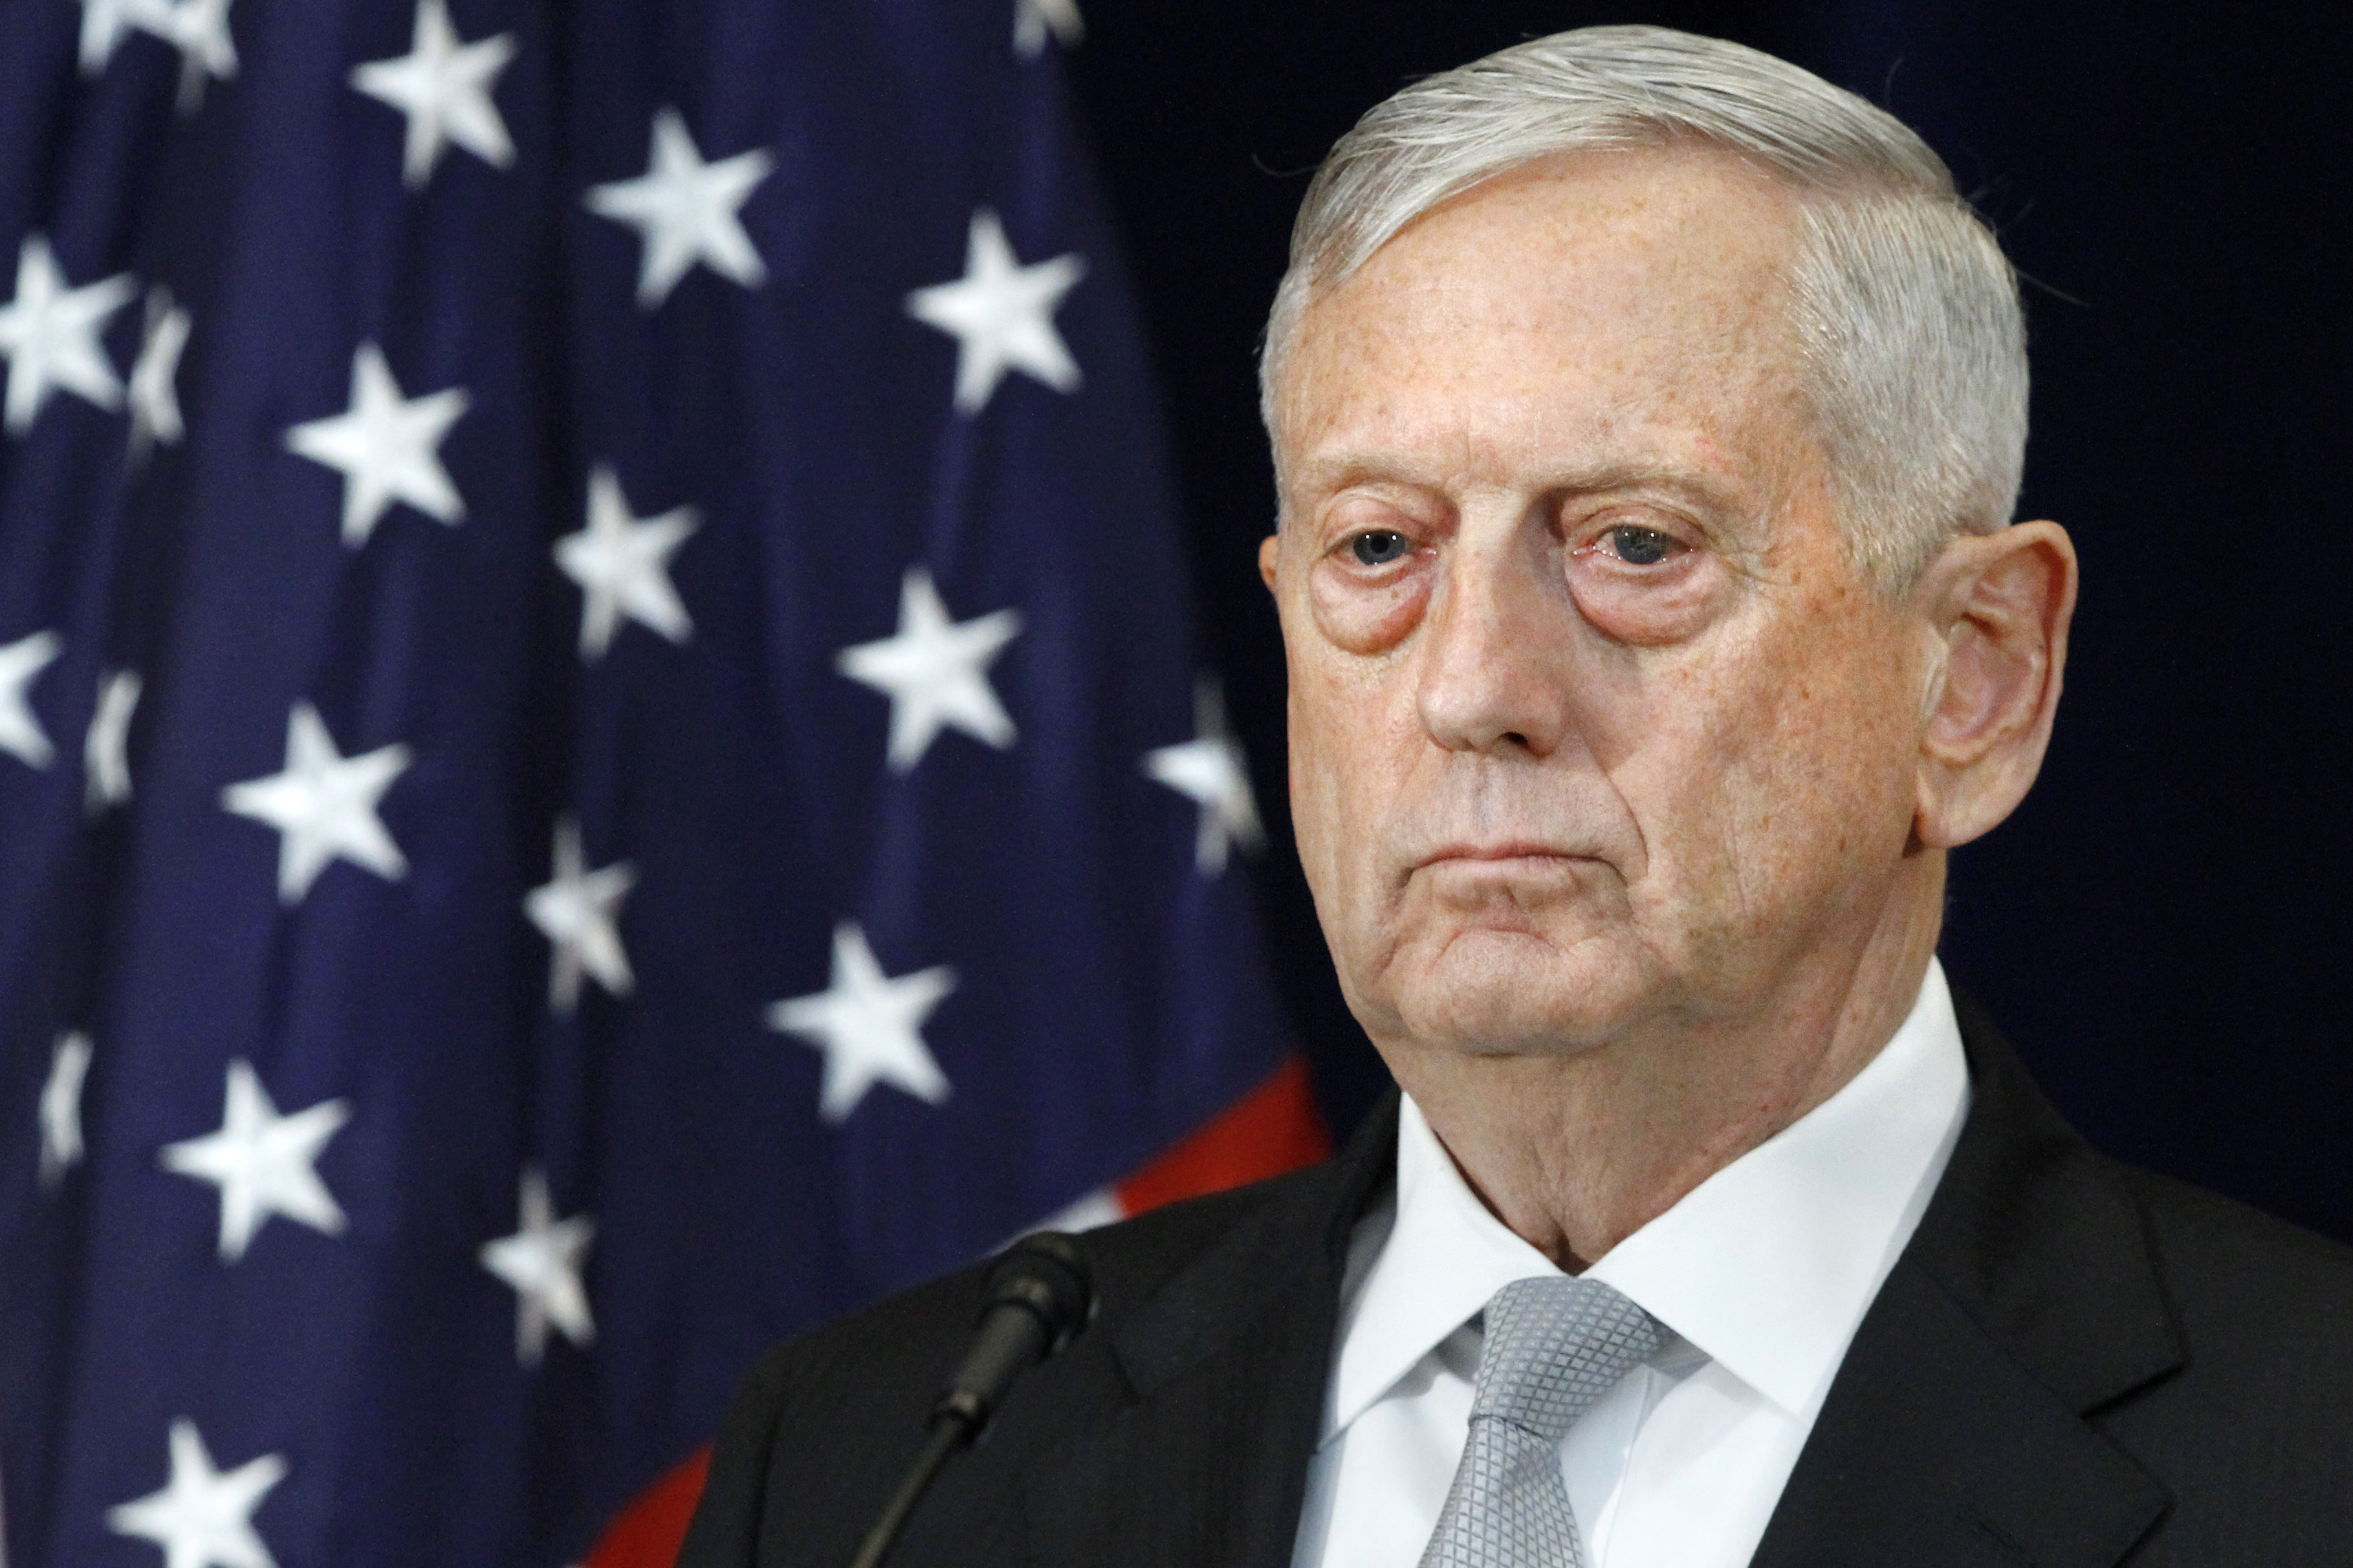 Defense Secretary James Mattis attends a news conference, Thursday, Aug. 17, 2017, at the State Department in Washington. (Jacquelyn Martin&mdash;AP)